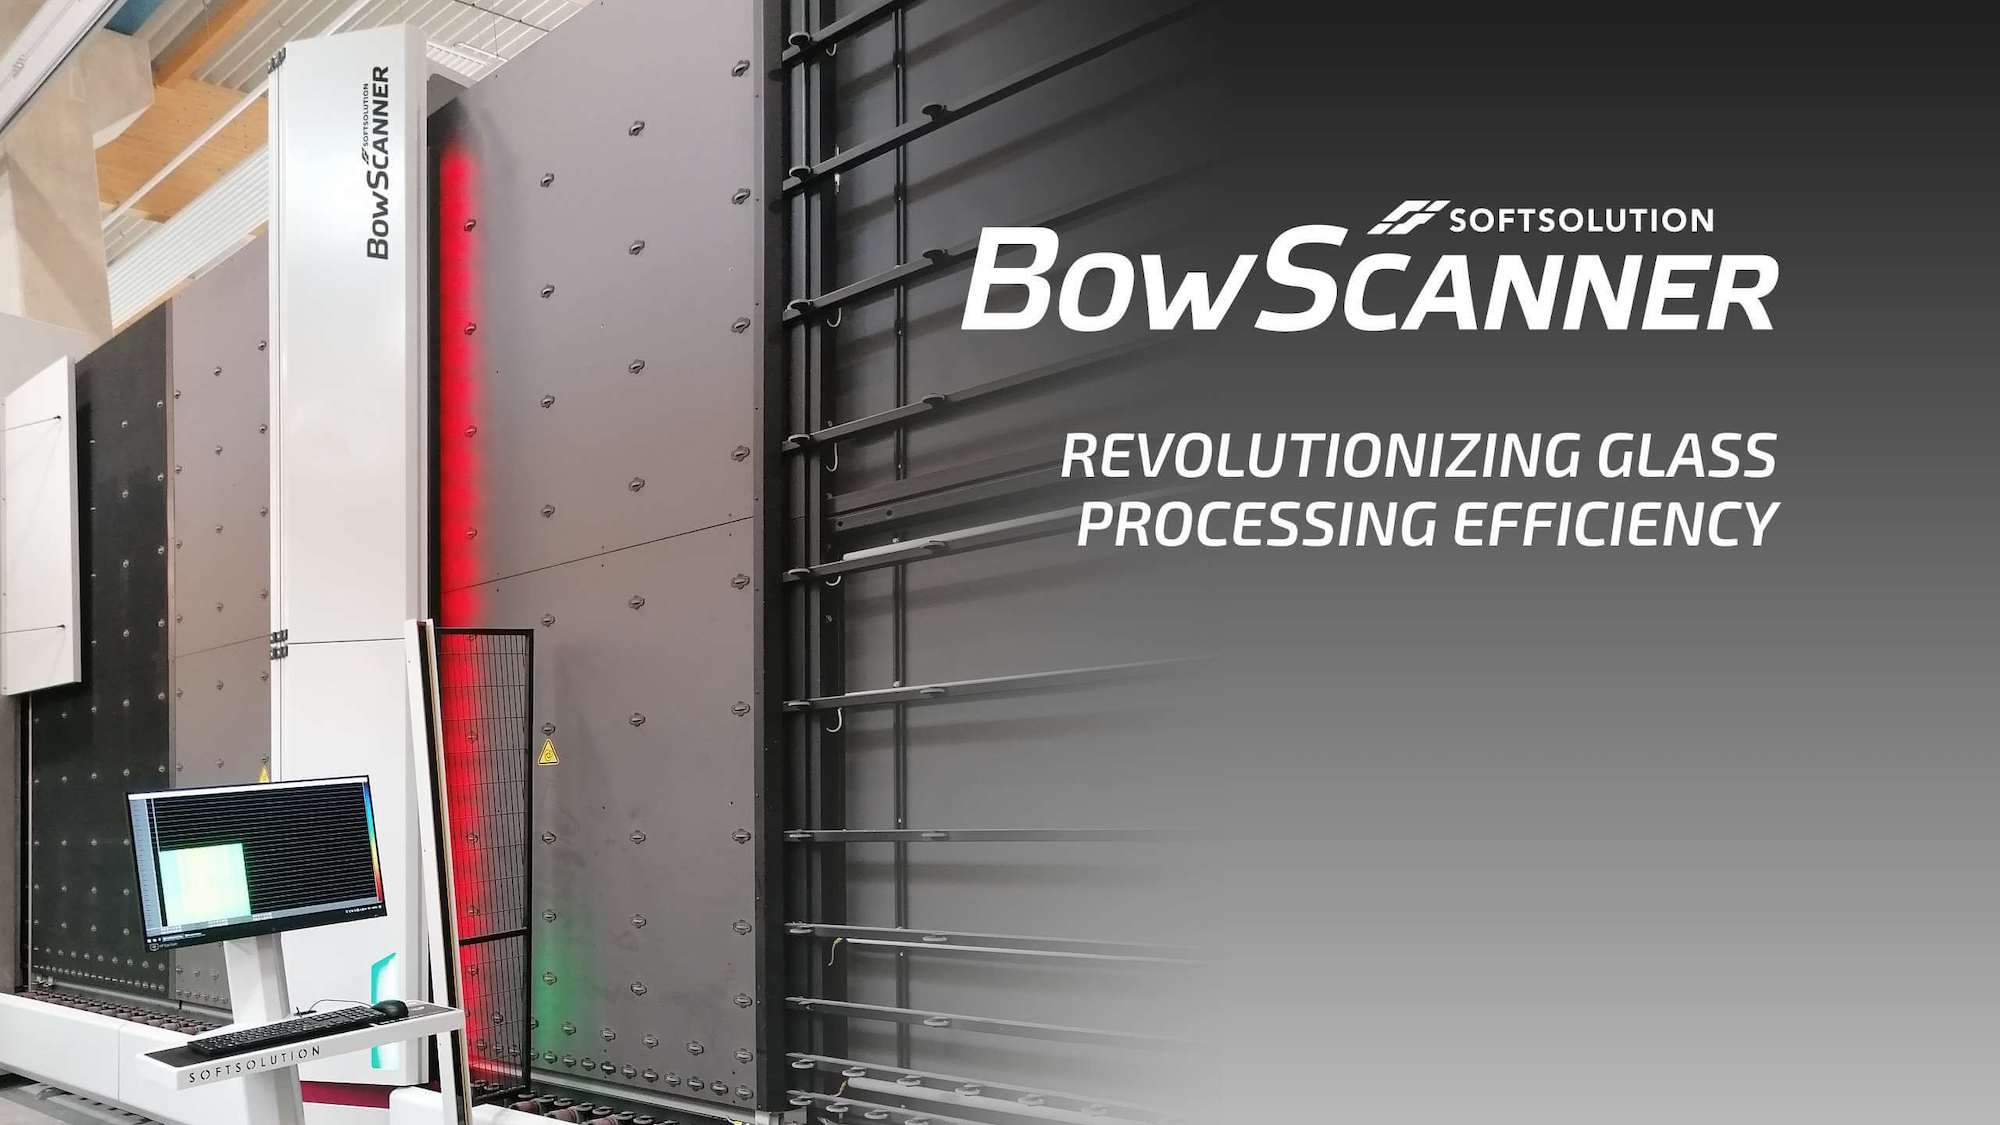 BowScanner - Revolutionizing Glass Pricessing Efficiency